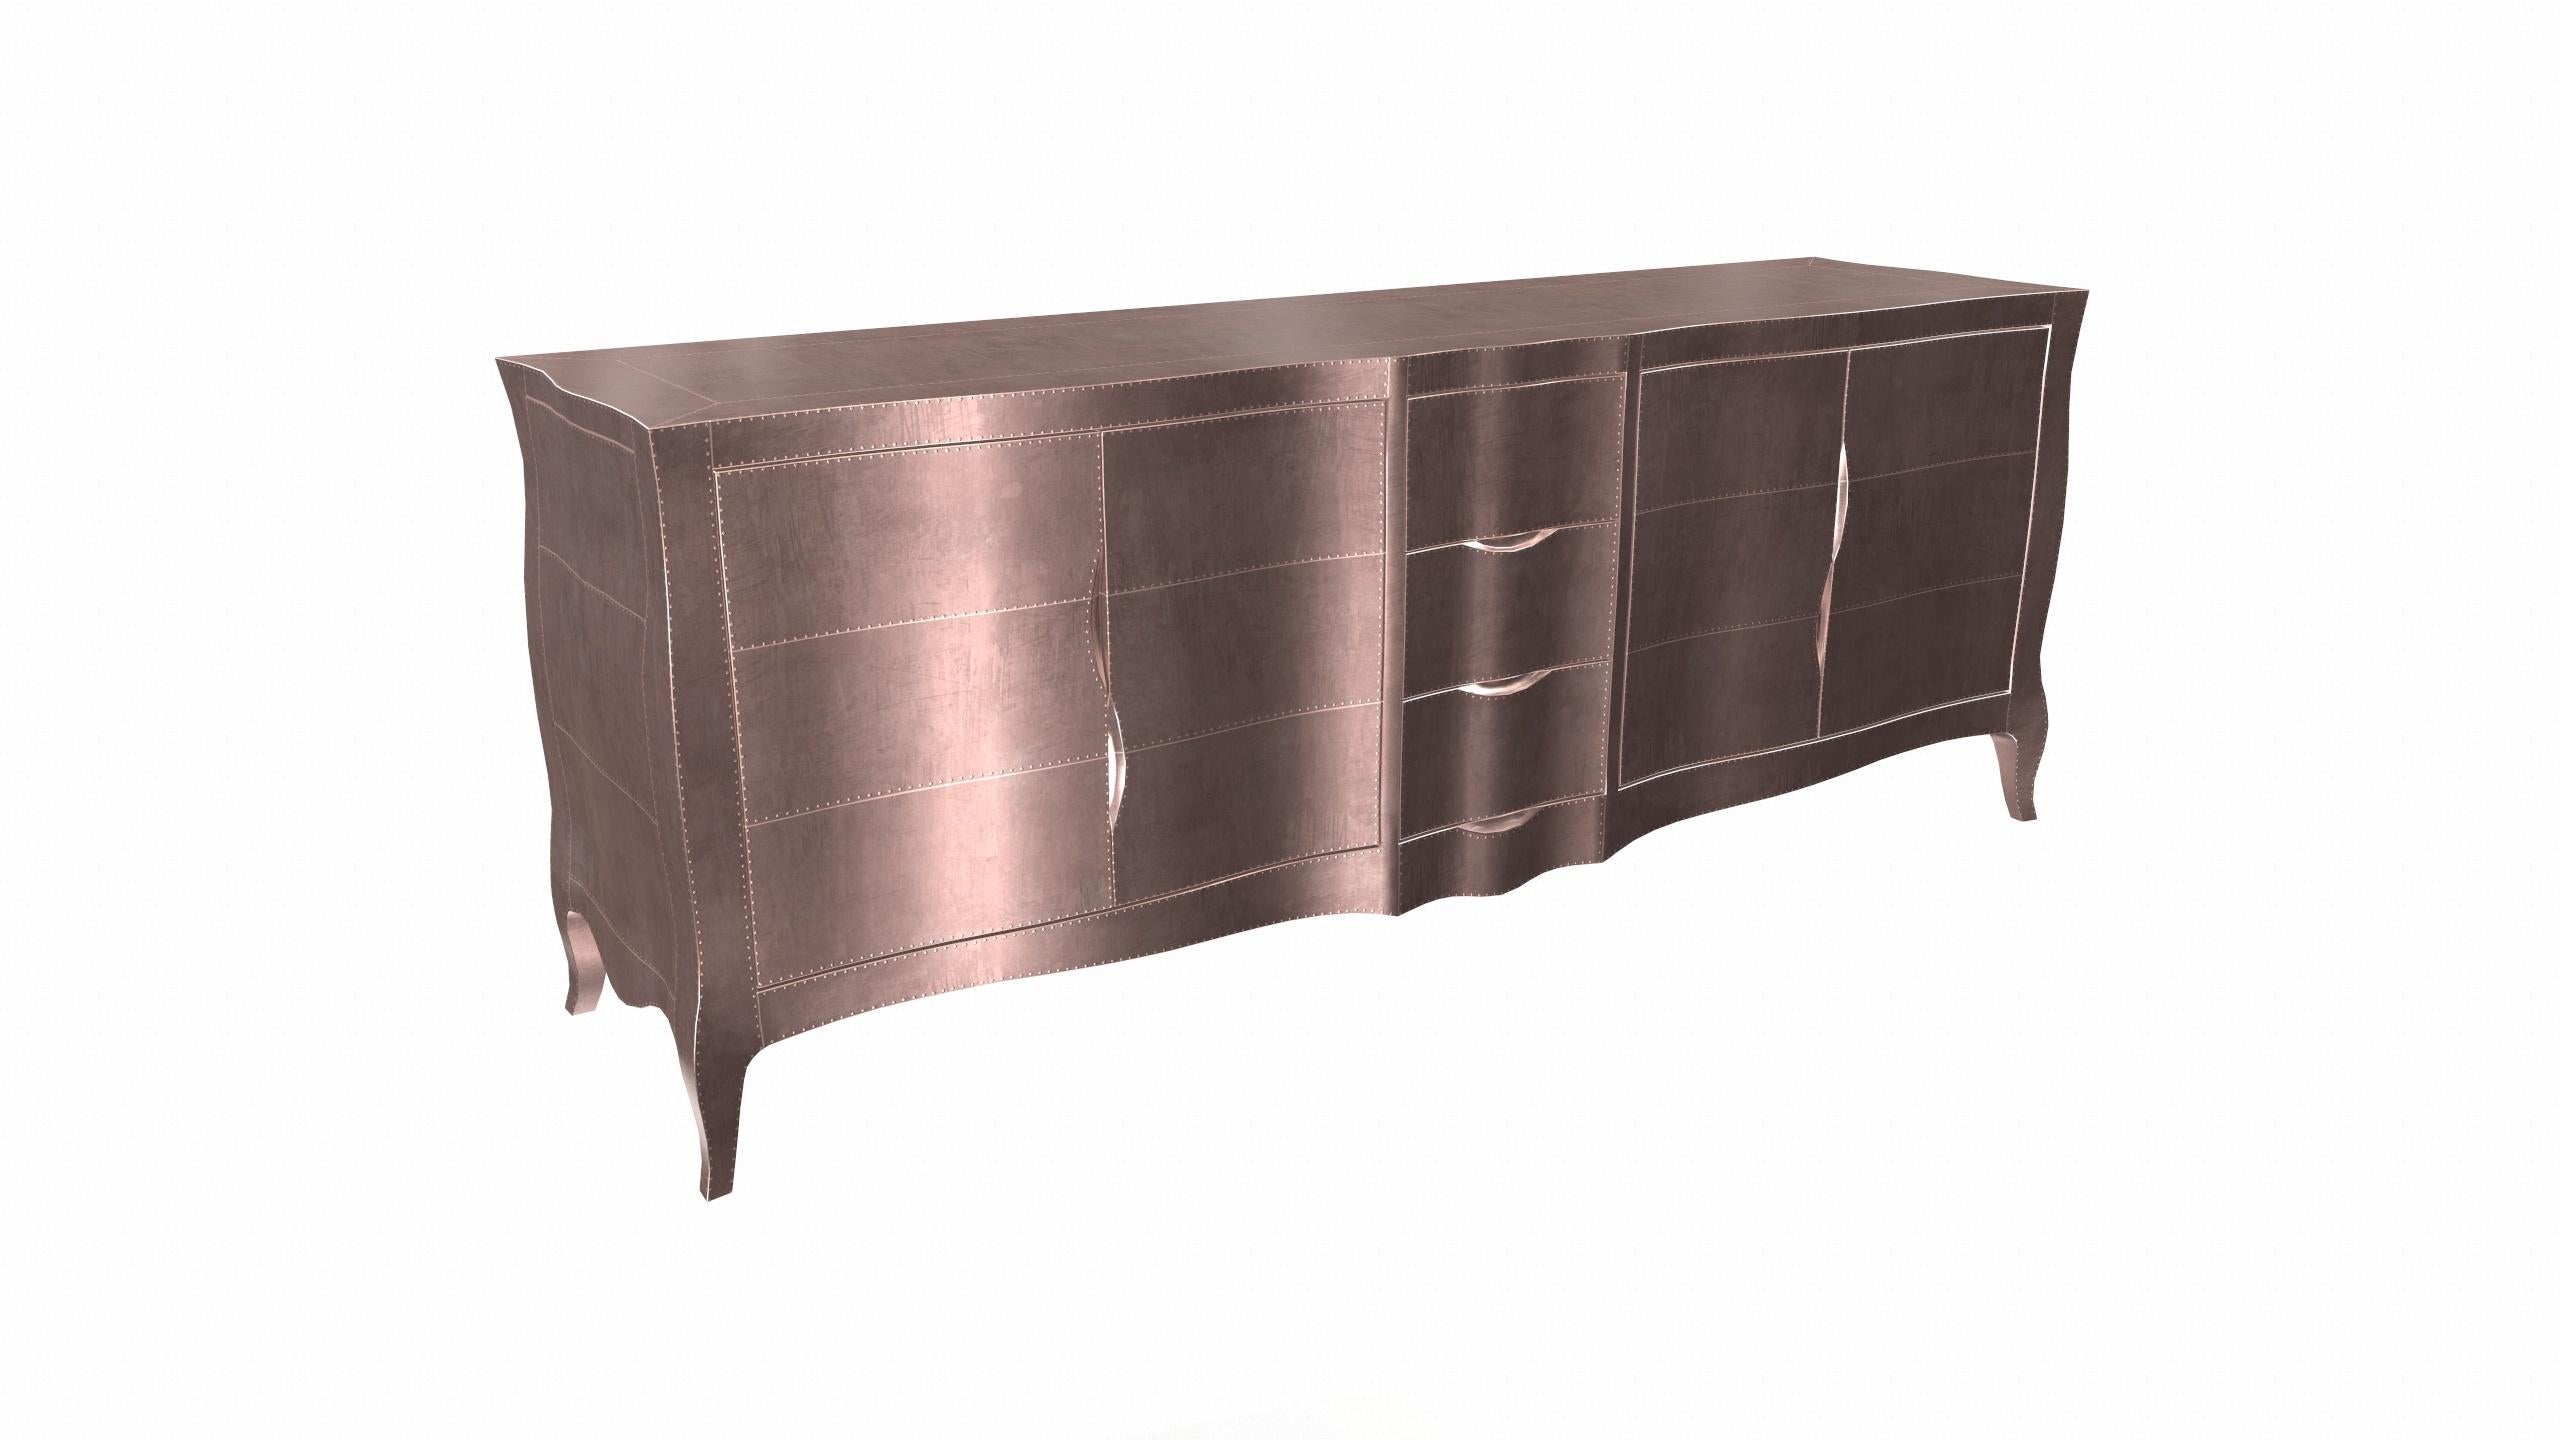 Contemporary Louise Credenza Art Deco Dressers in Smooth Copper by Paul Mathieu for S Odegard For Sale